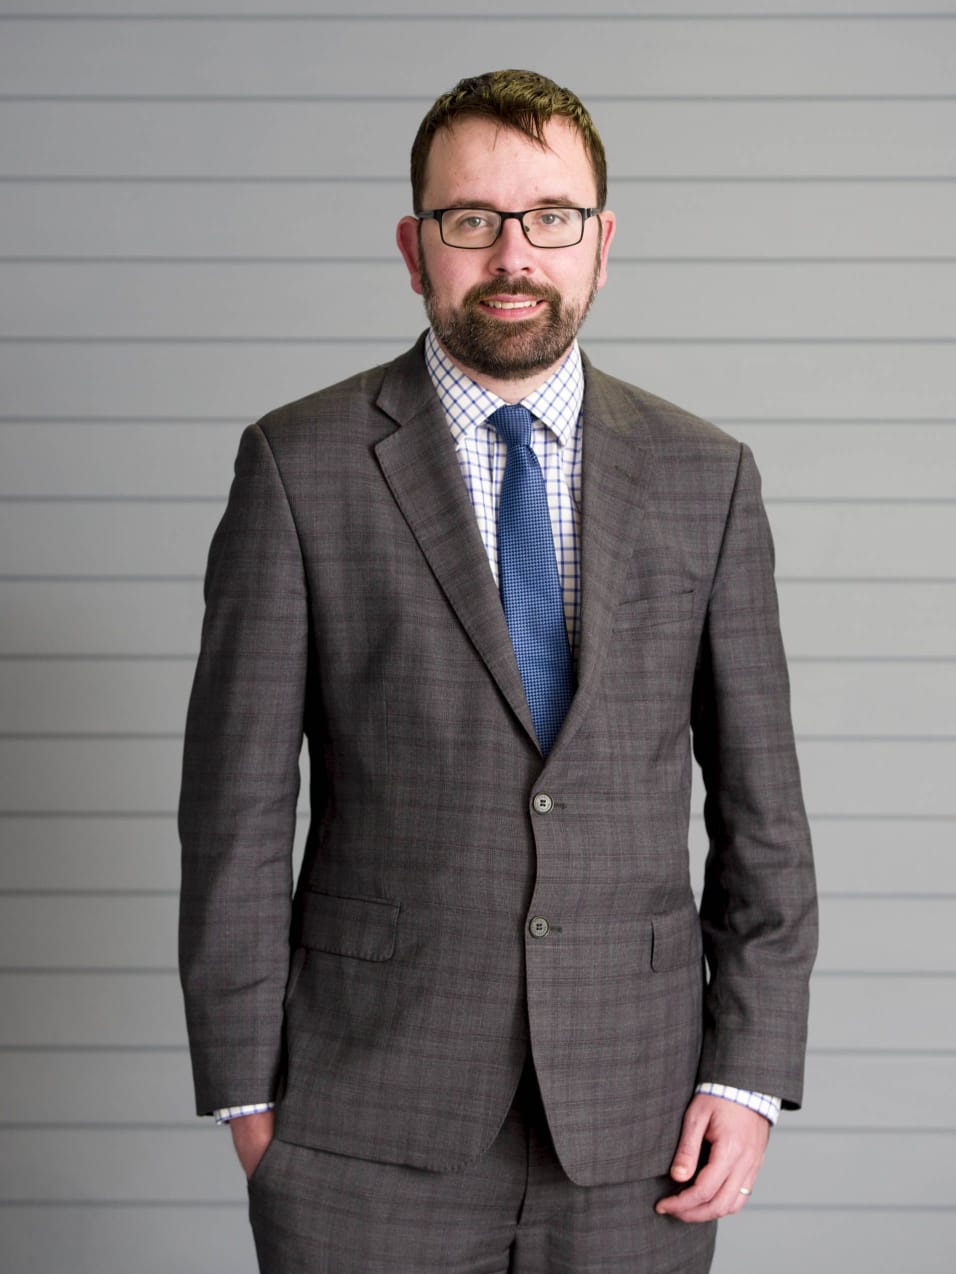 Photo of a man wearing a grey suit, white shirt, and blue tie. He has short brown hair and a short brown beard. He wears dark glasses and has one hand in a pocket.